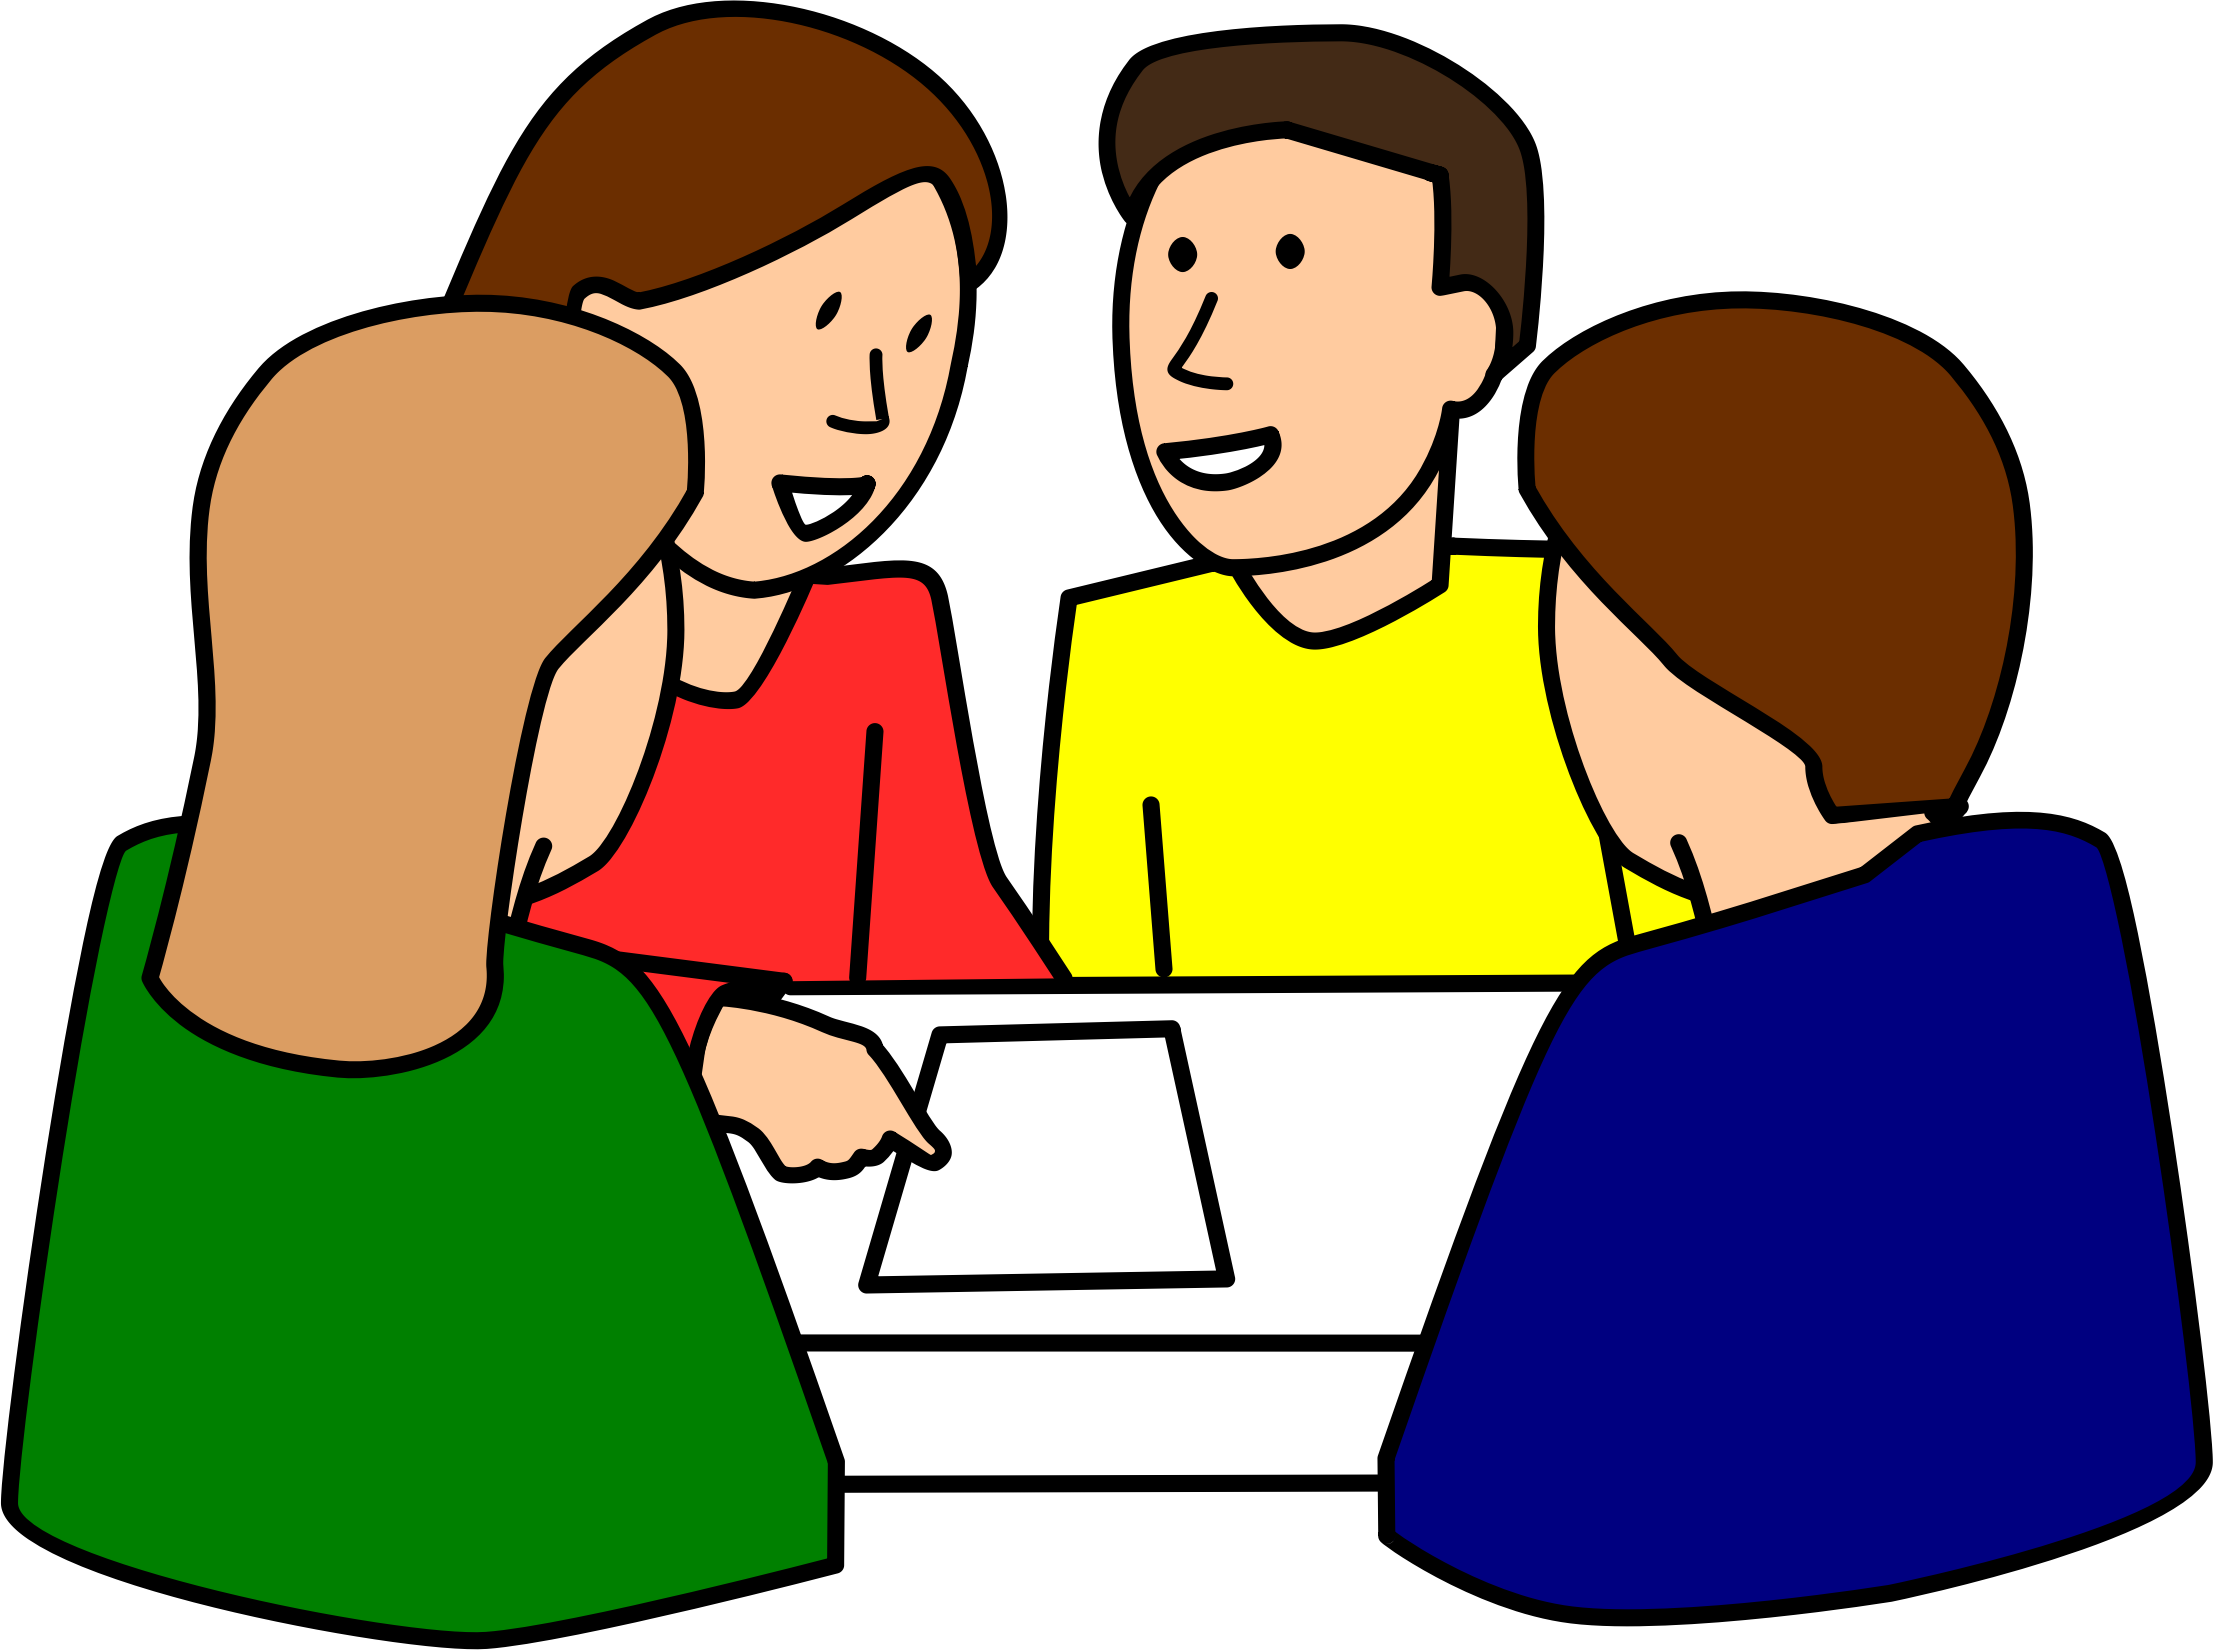 Small Group Clipart